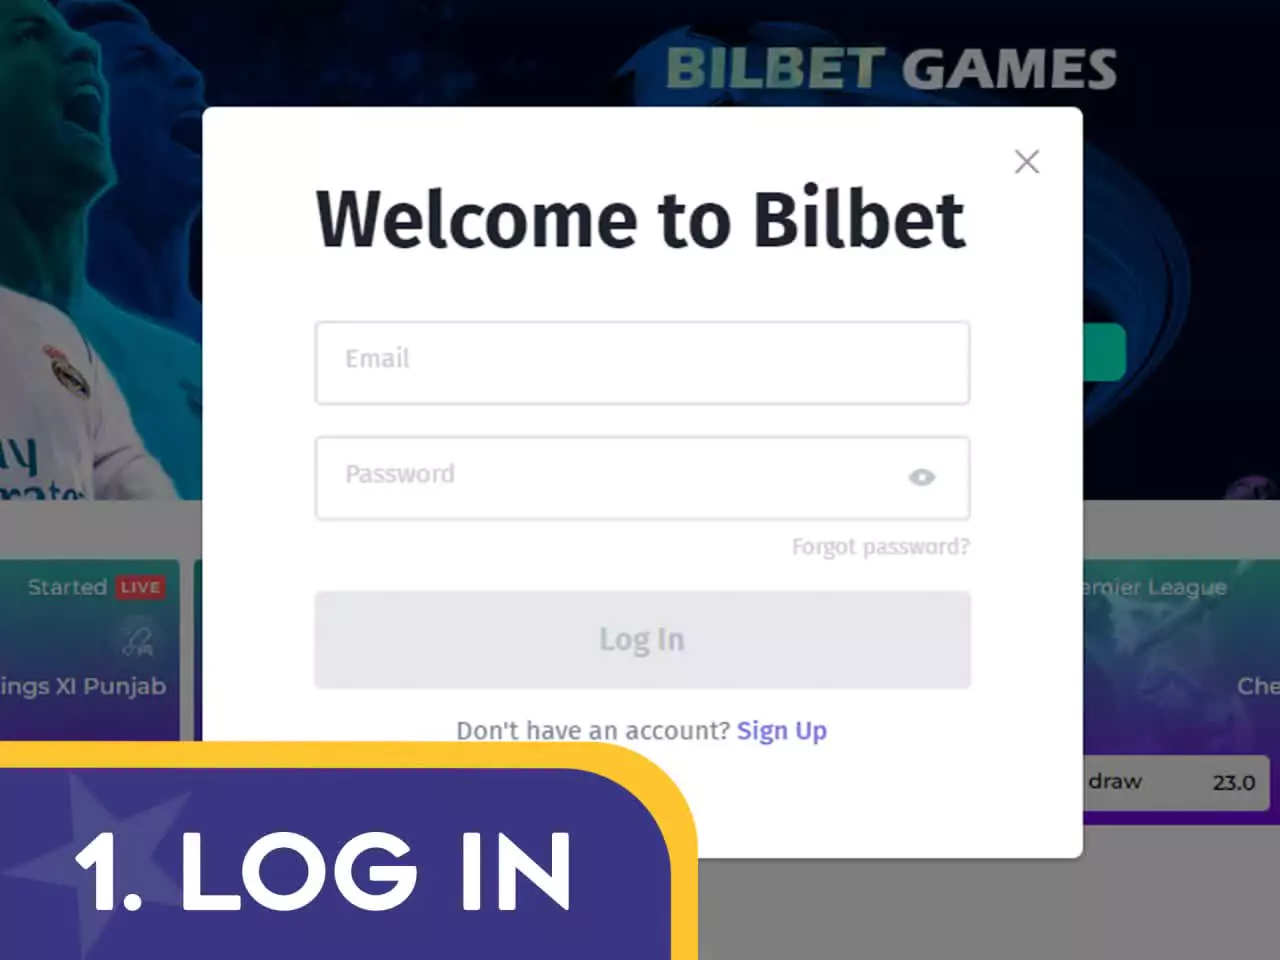 Log in to your Bilbet account.